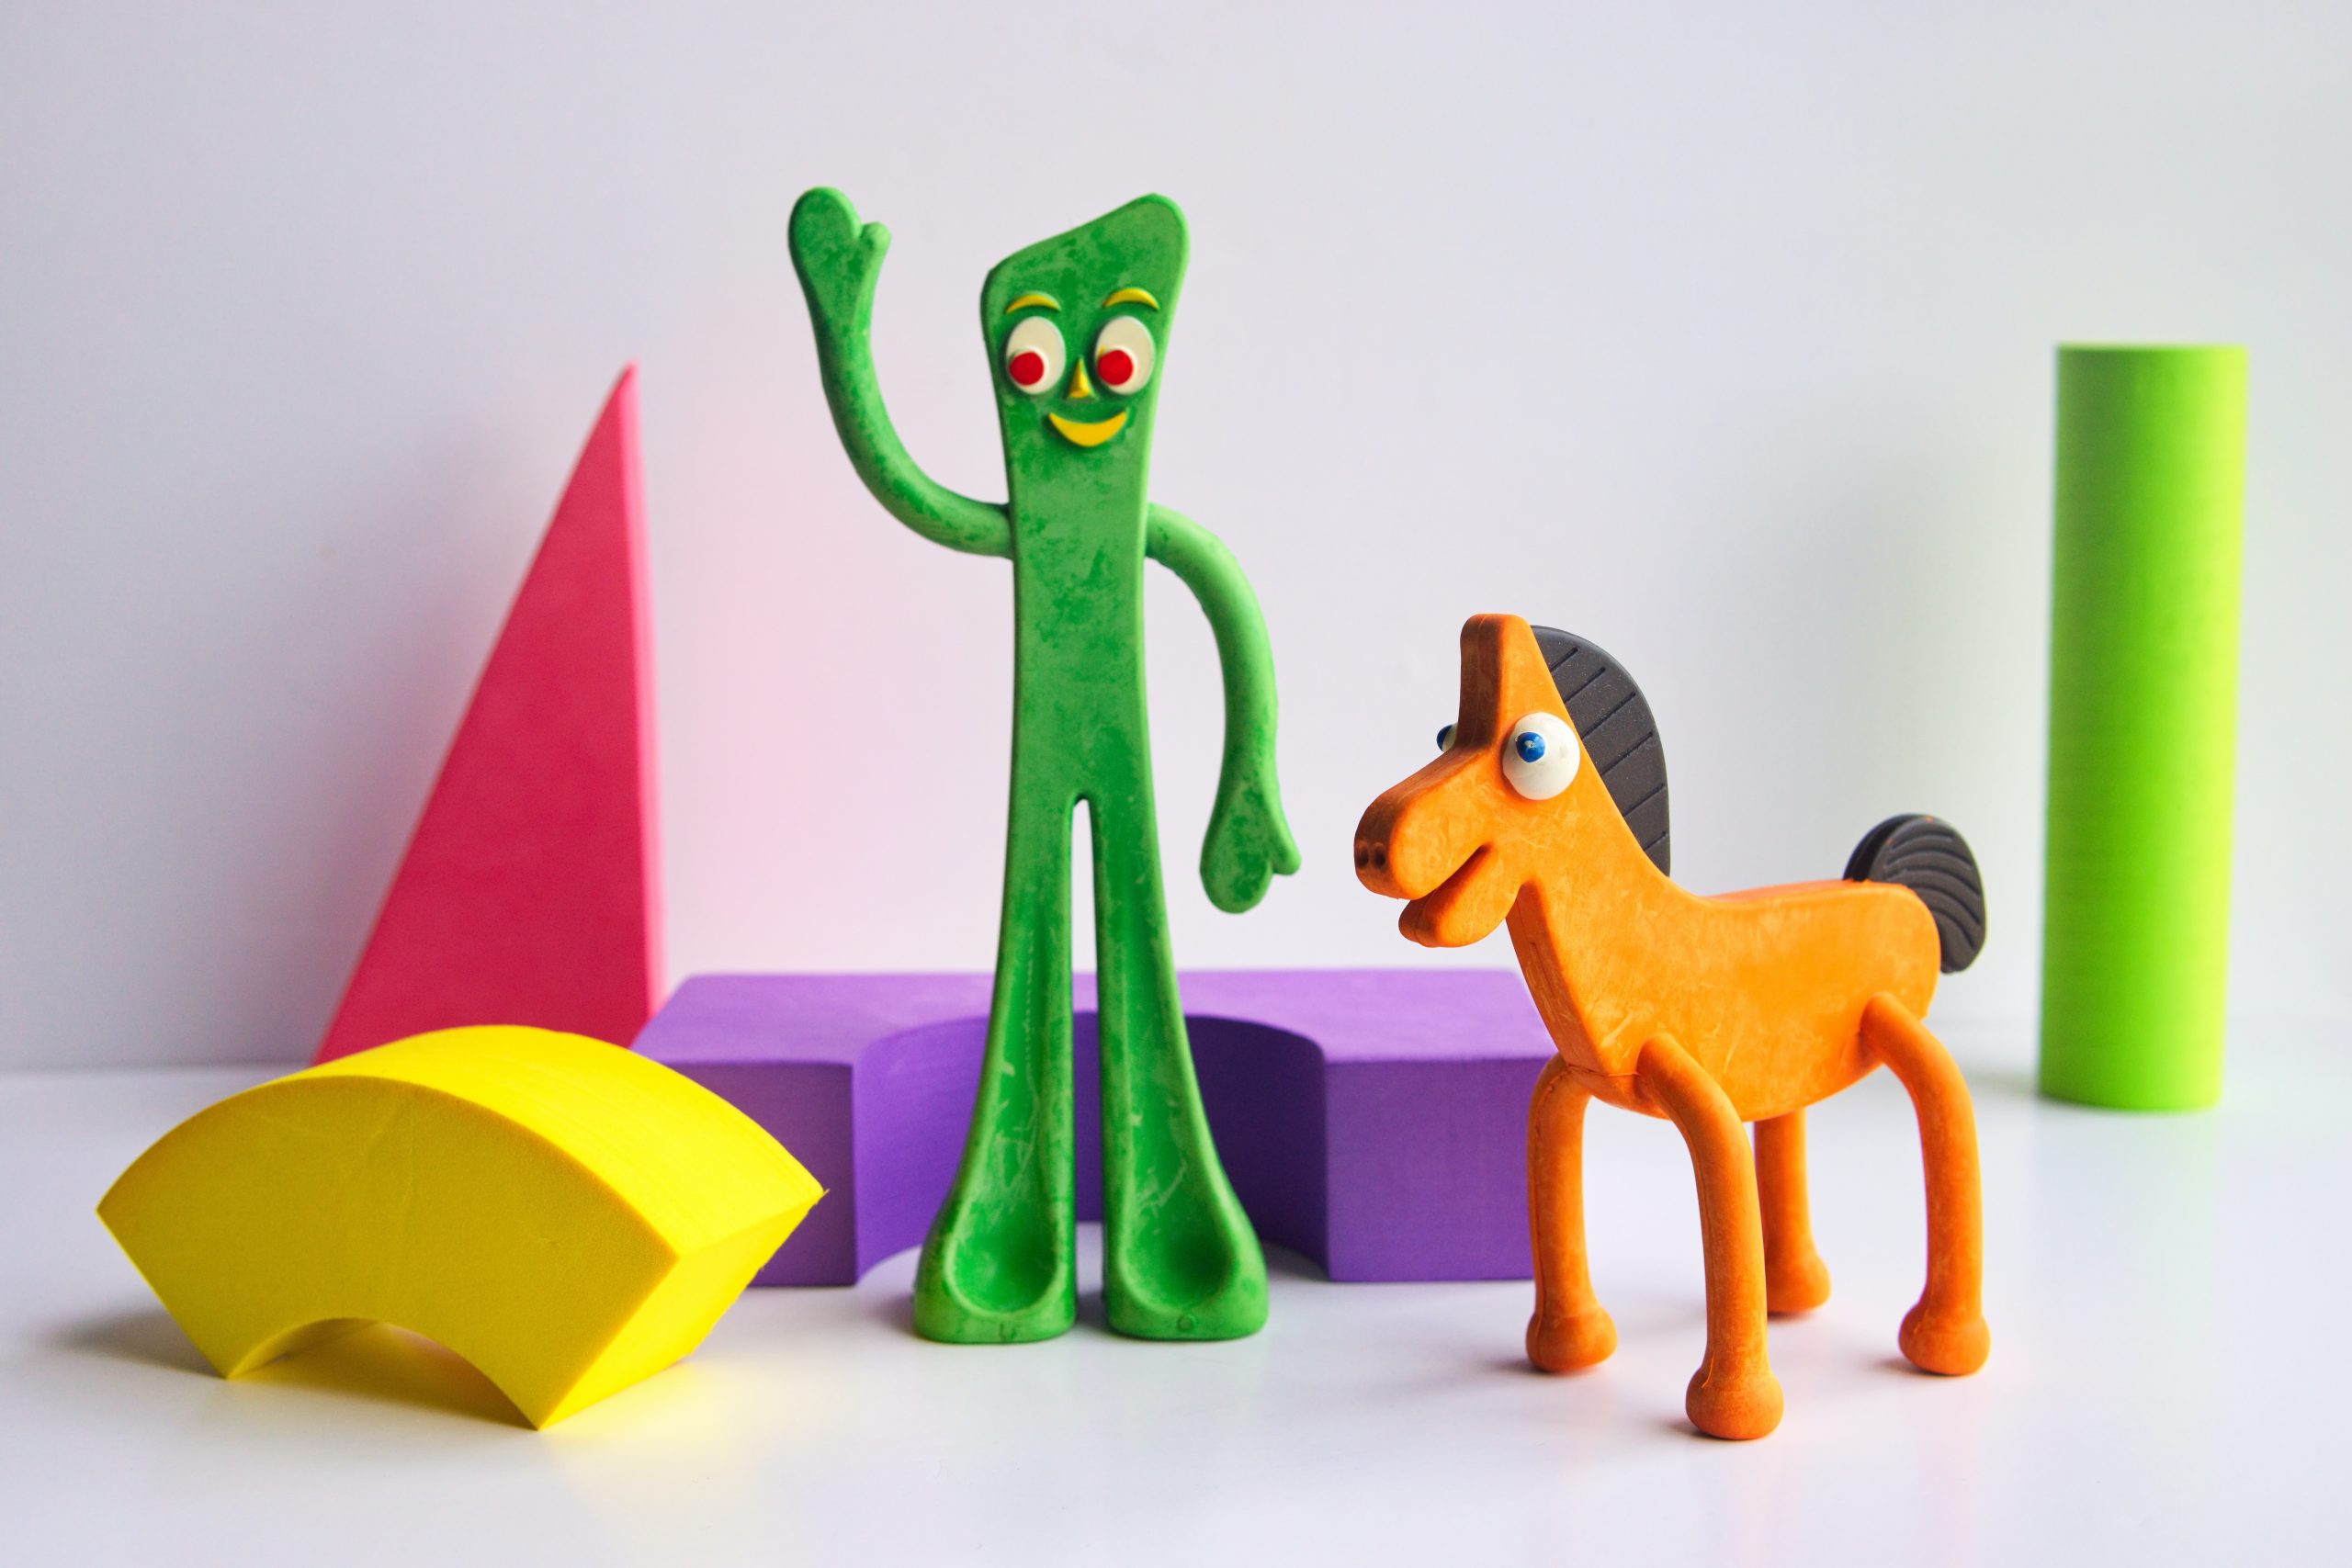 Read more about the article The “Gumby” of Company Employee Benefits Plans